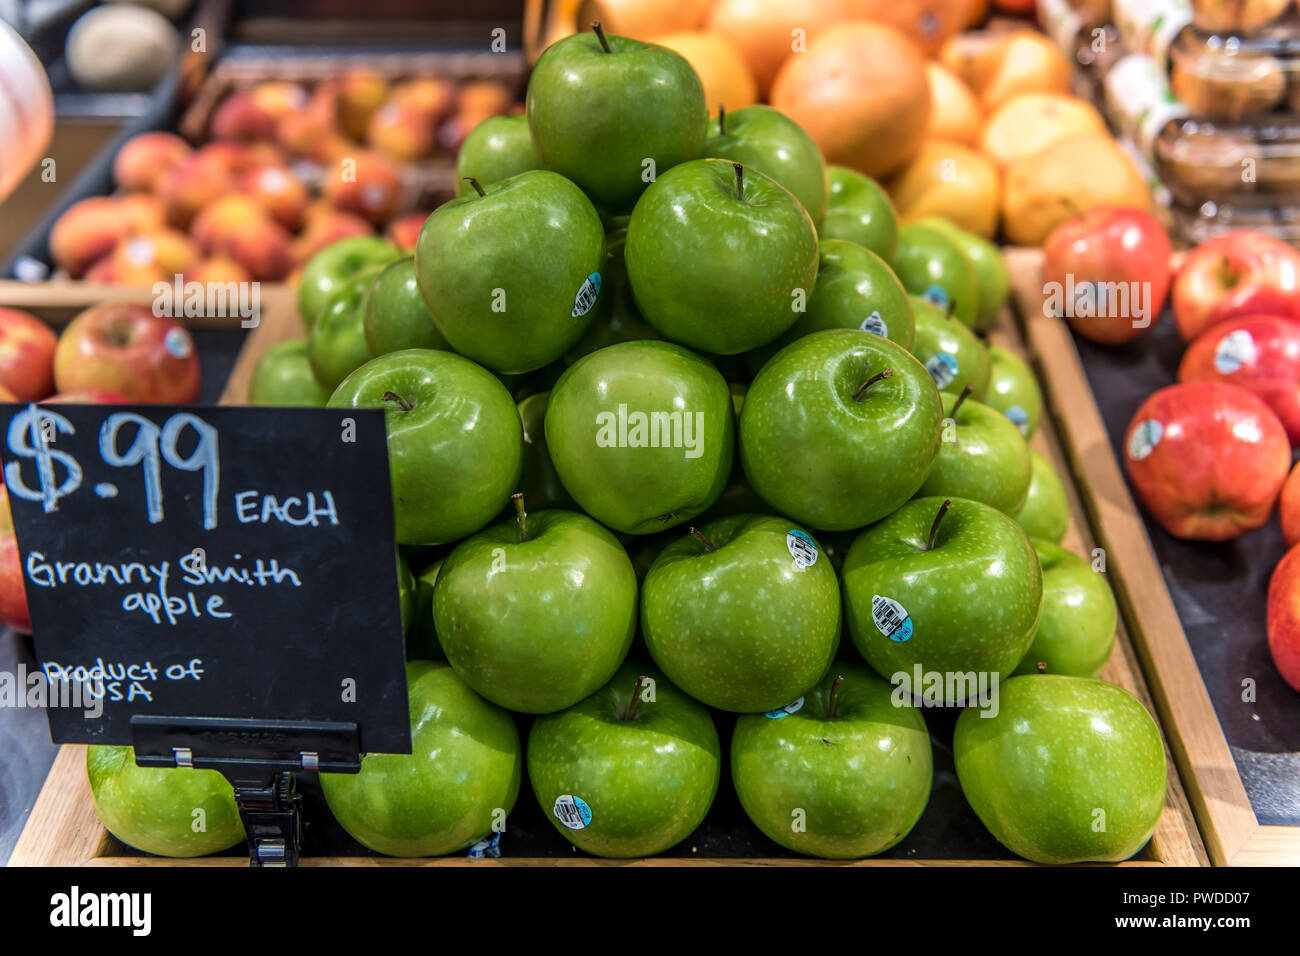 https://c8.alamy.com/comp/PWDD07/stack-of-apples-for-sale-in-a-grocery-store-PWDD07.jpg